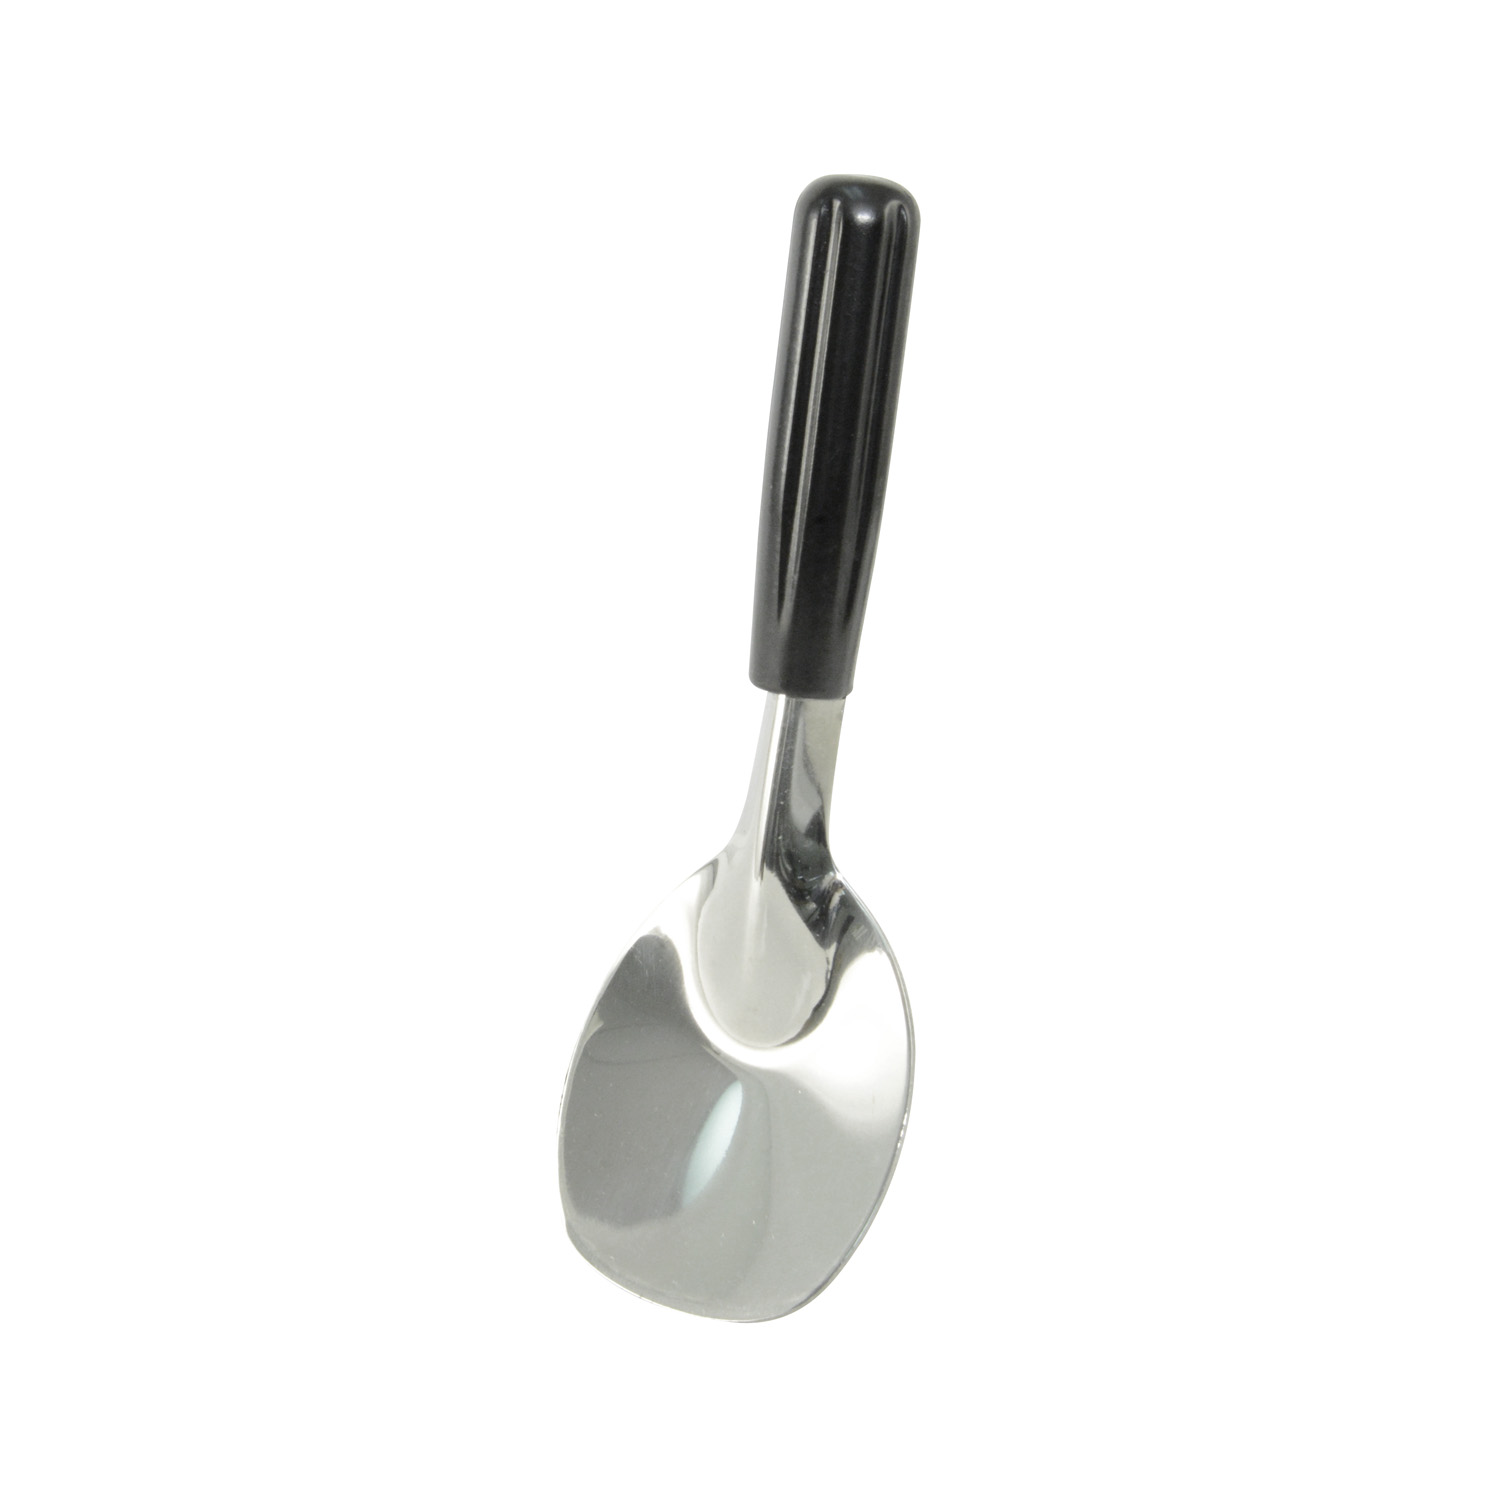 CAC China SICS-1 Stainless Steel Ice Cream Spade with Black Handle 9 "